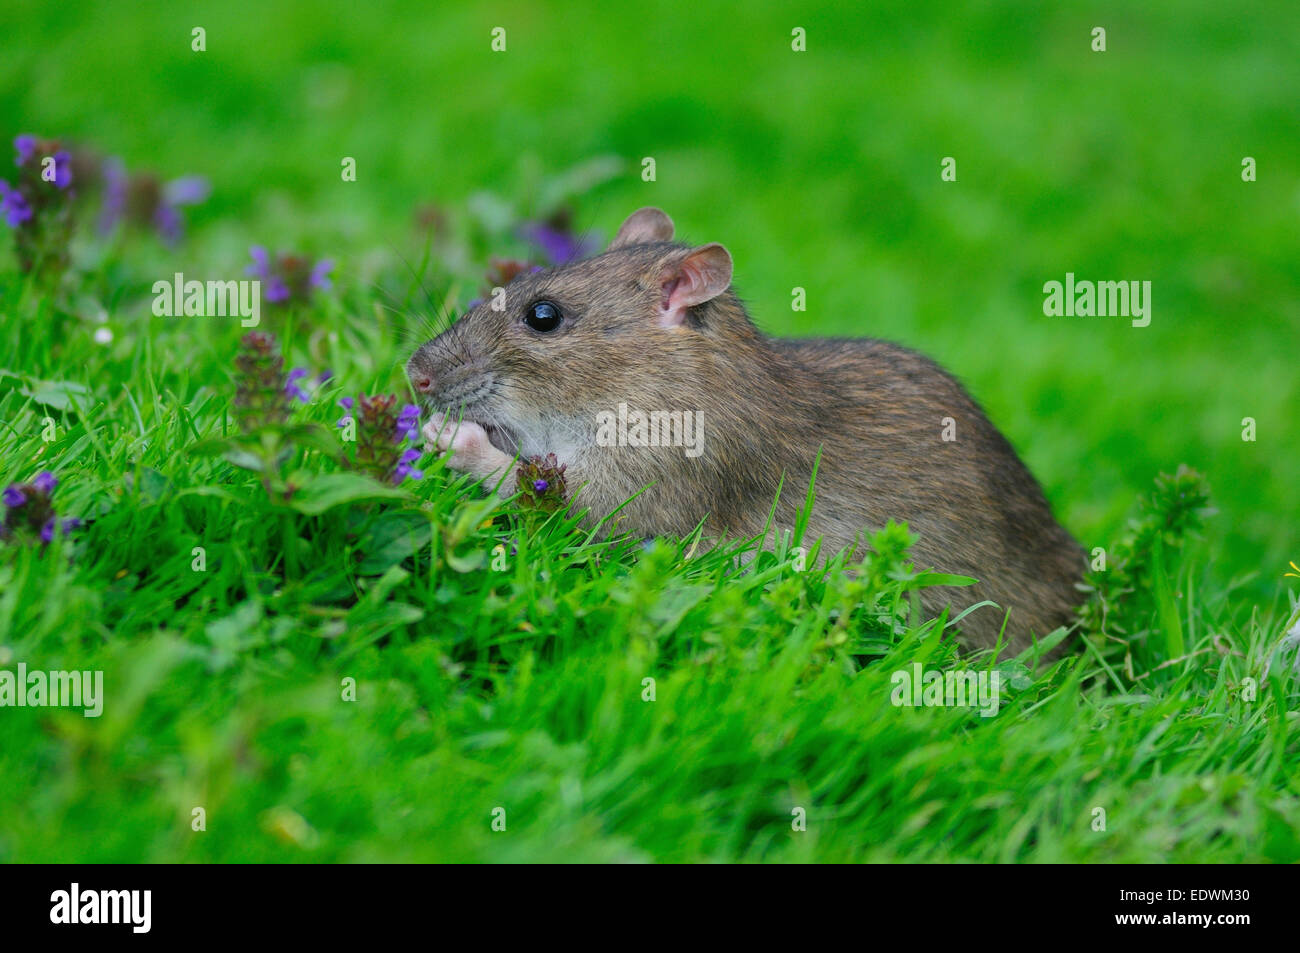 A common brown rat in a grassy green field UK Stock Photo